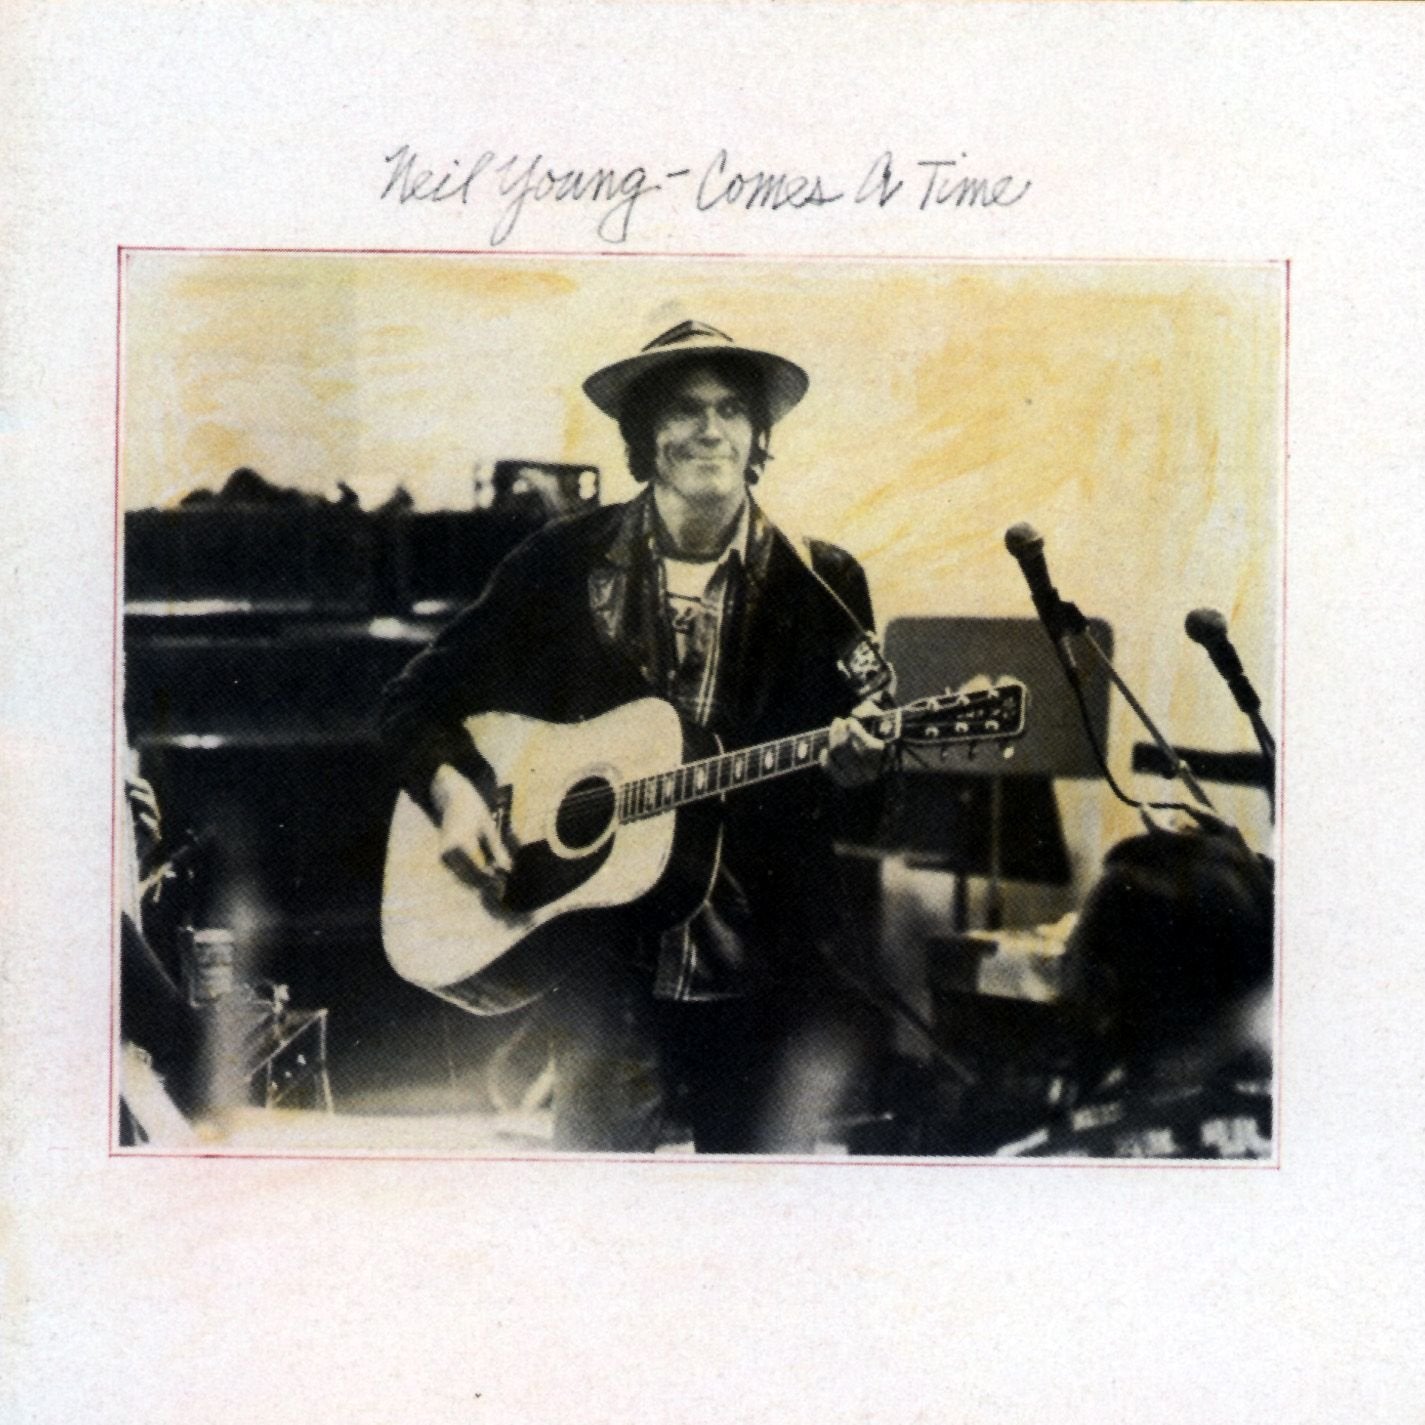 NEIL YOUNG - COMES A TIME - VINYL LP - Wah Wah Records